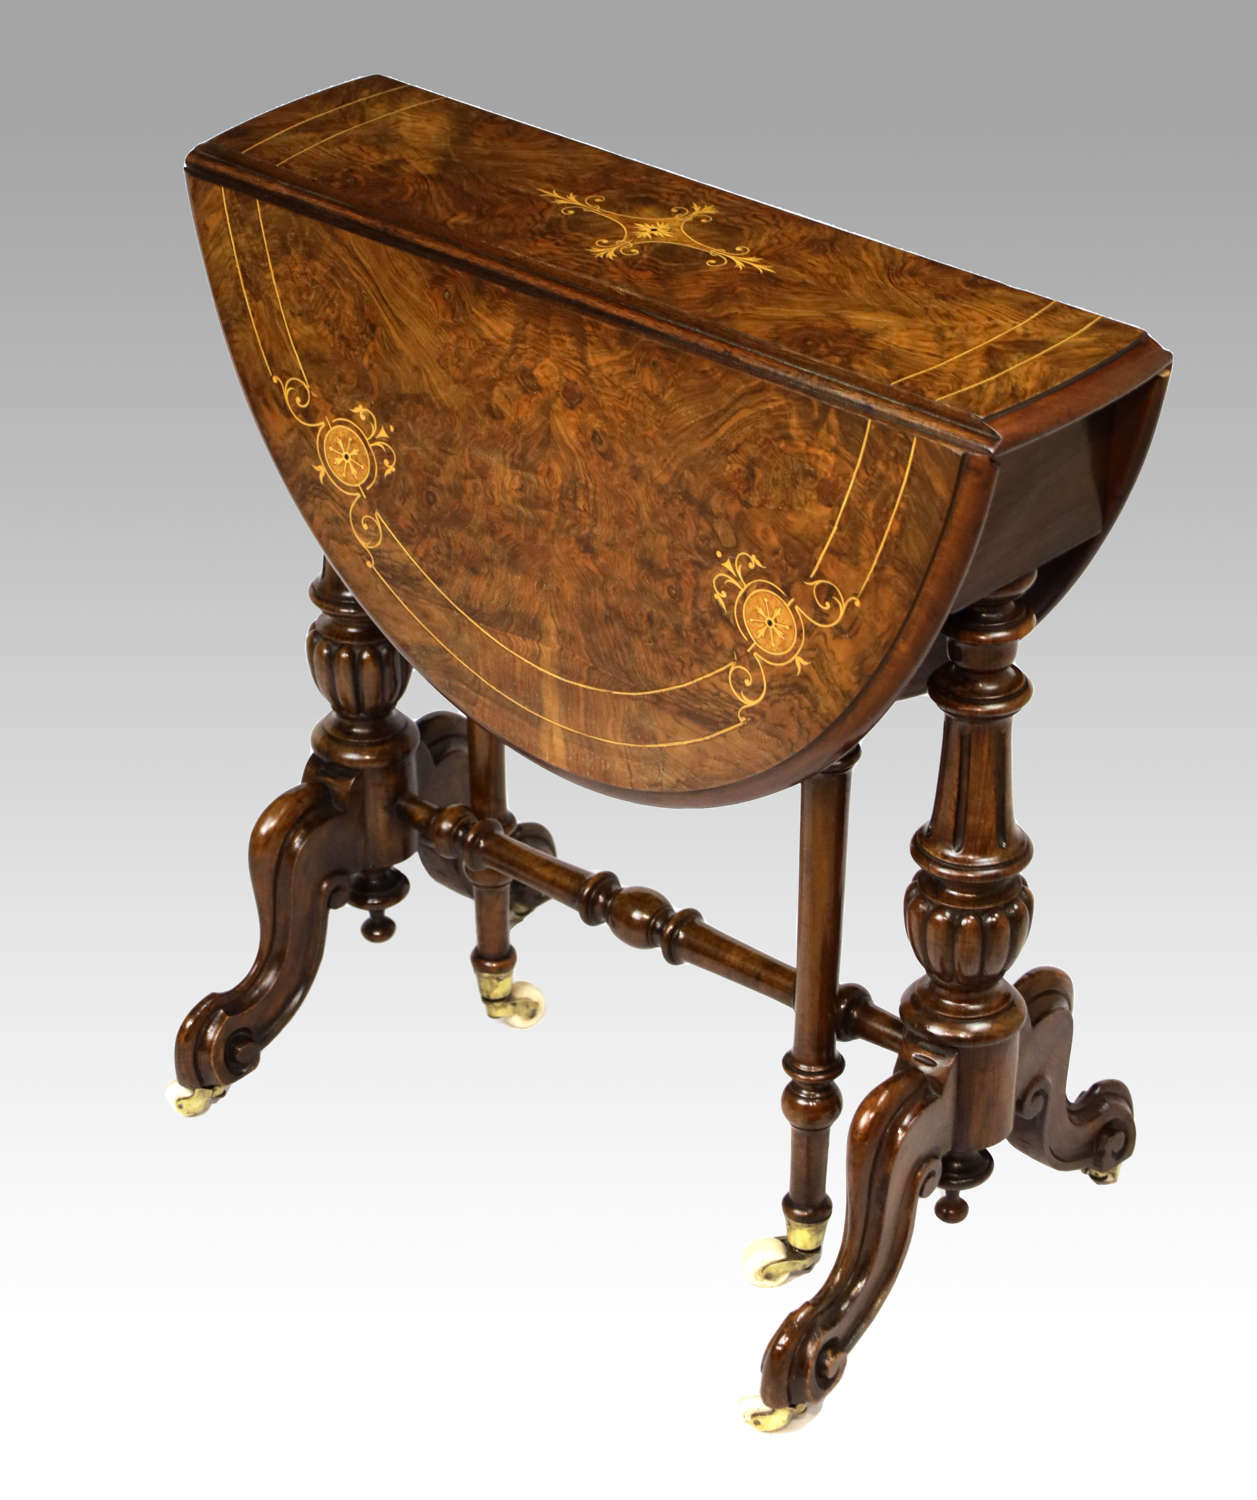 An Exquisite Victorian Burr Walnut Cabriole Leg Baby Sutherland Table